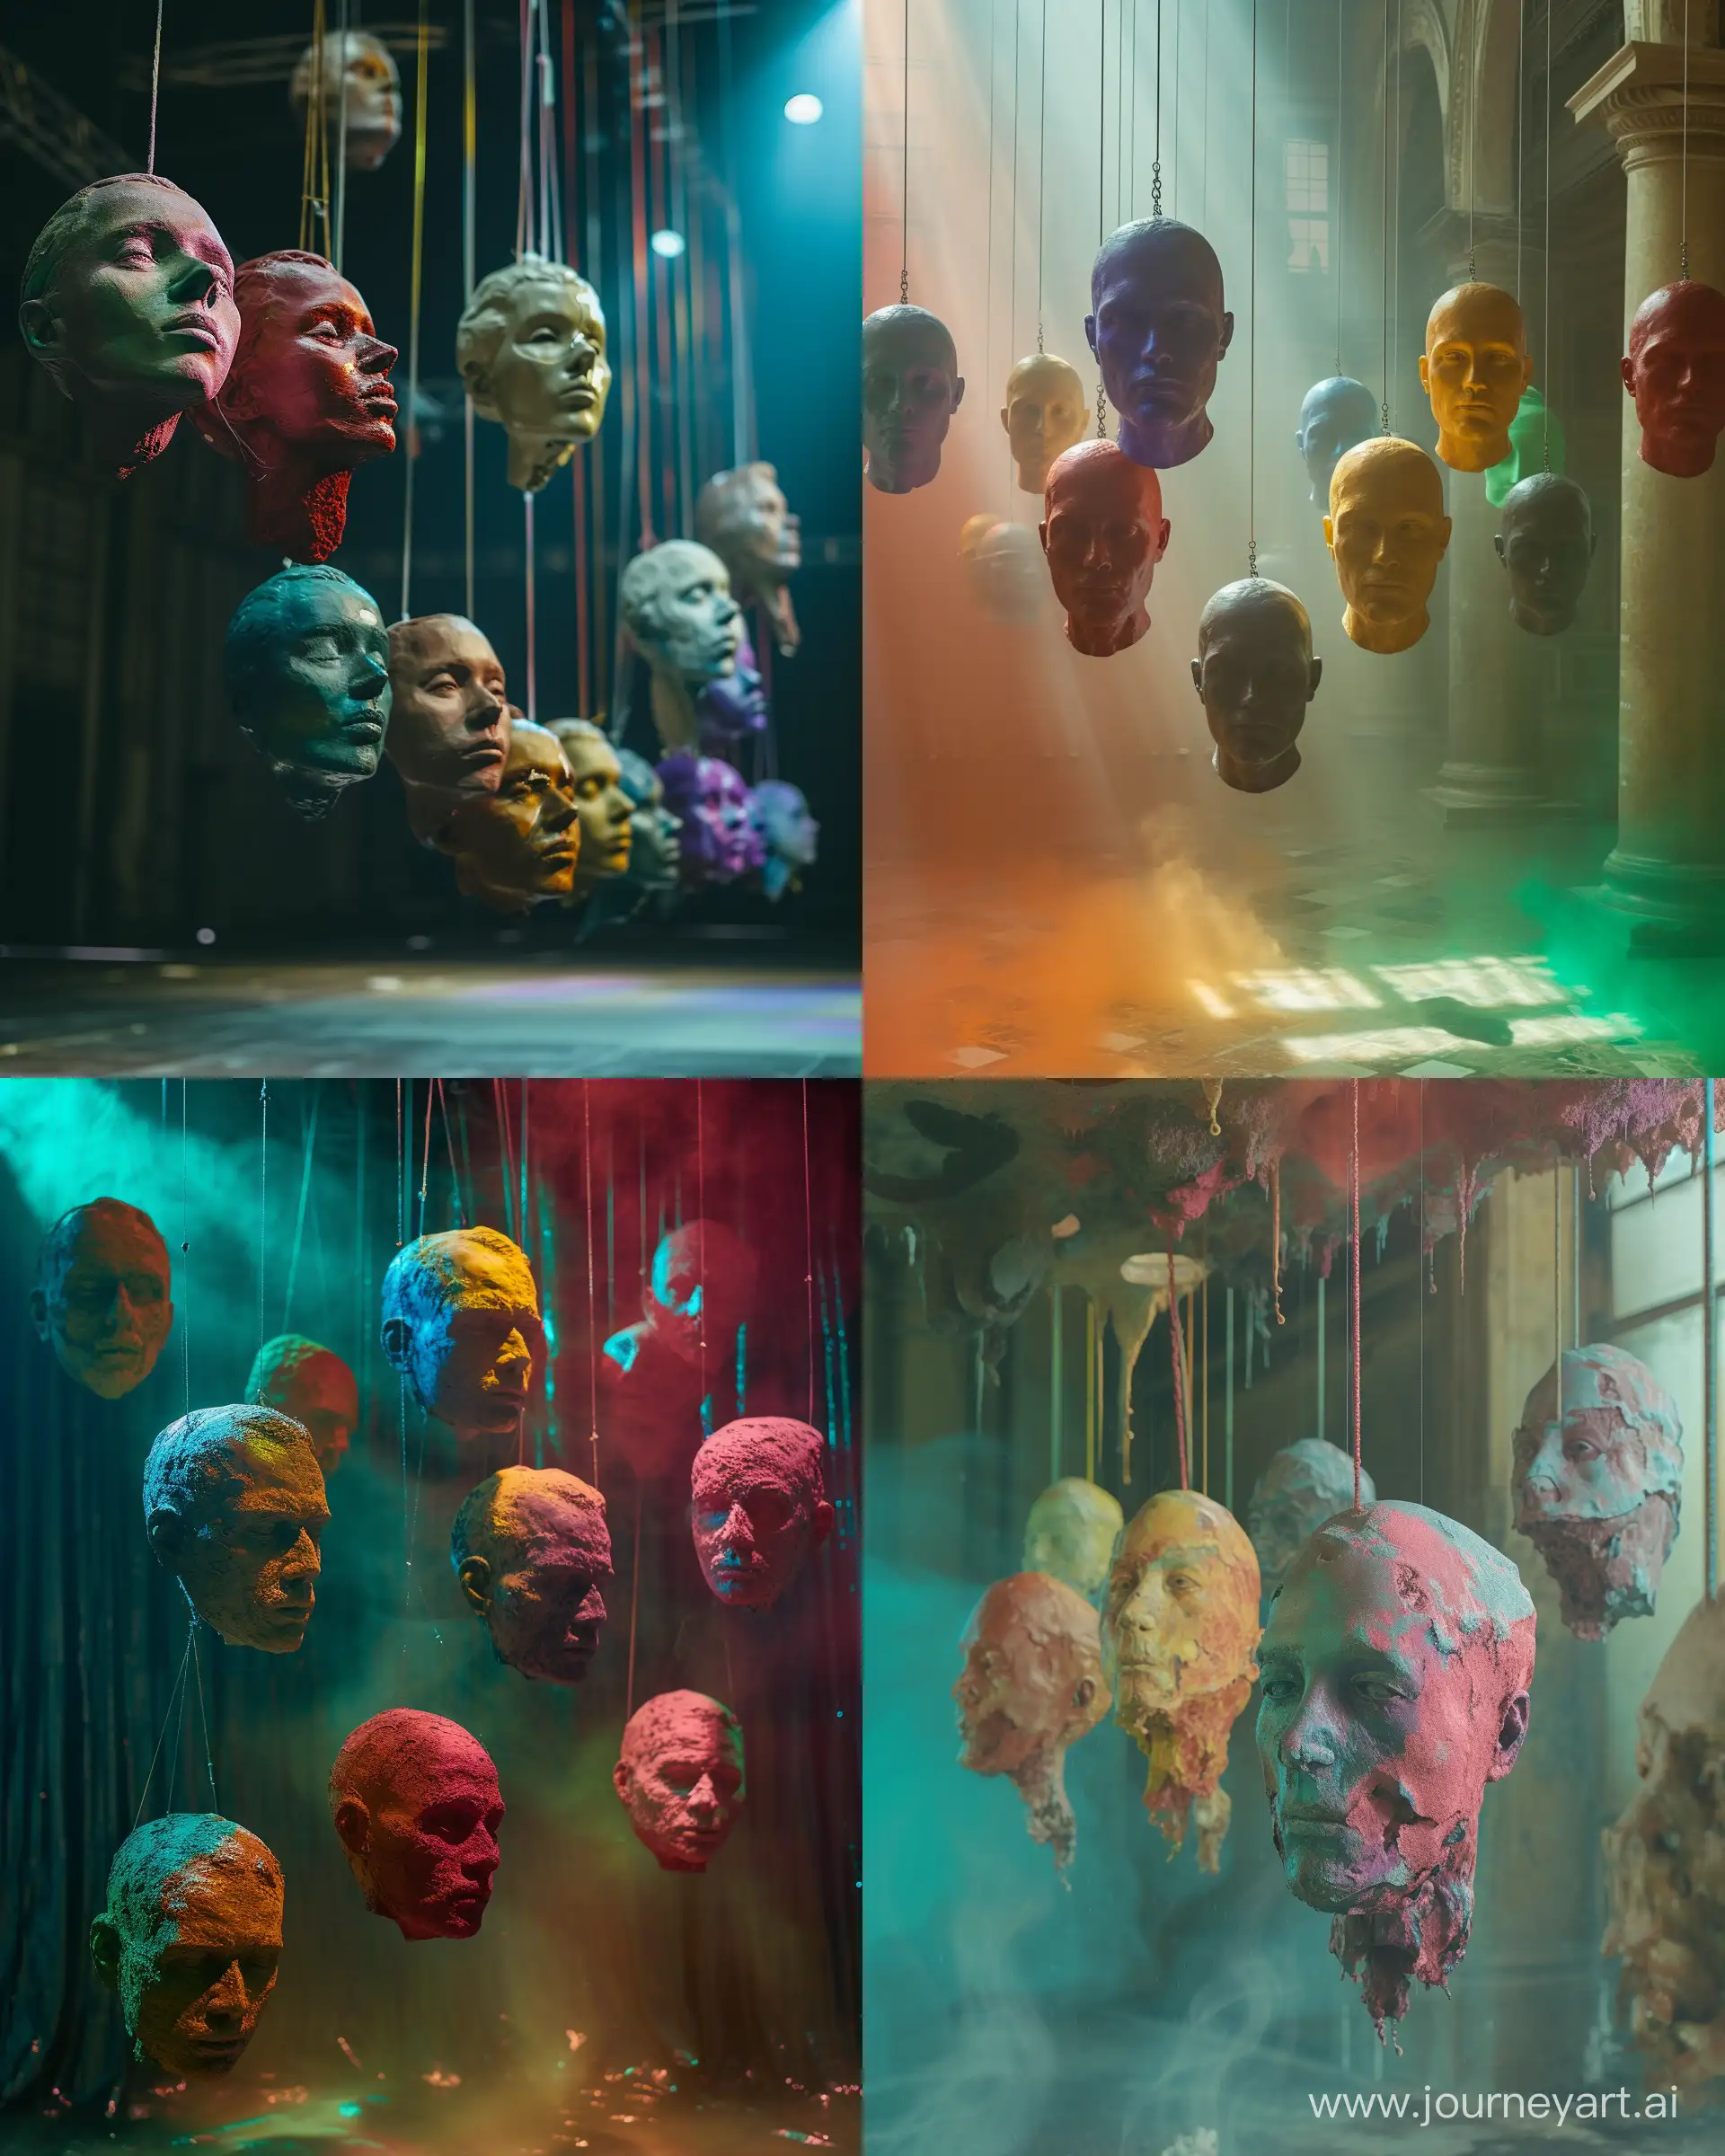 Suspended-Colorful-Surrealistic-Human-Head-Sculptures-in-a-Magical-Atmosphere